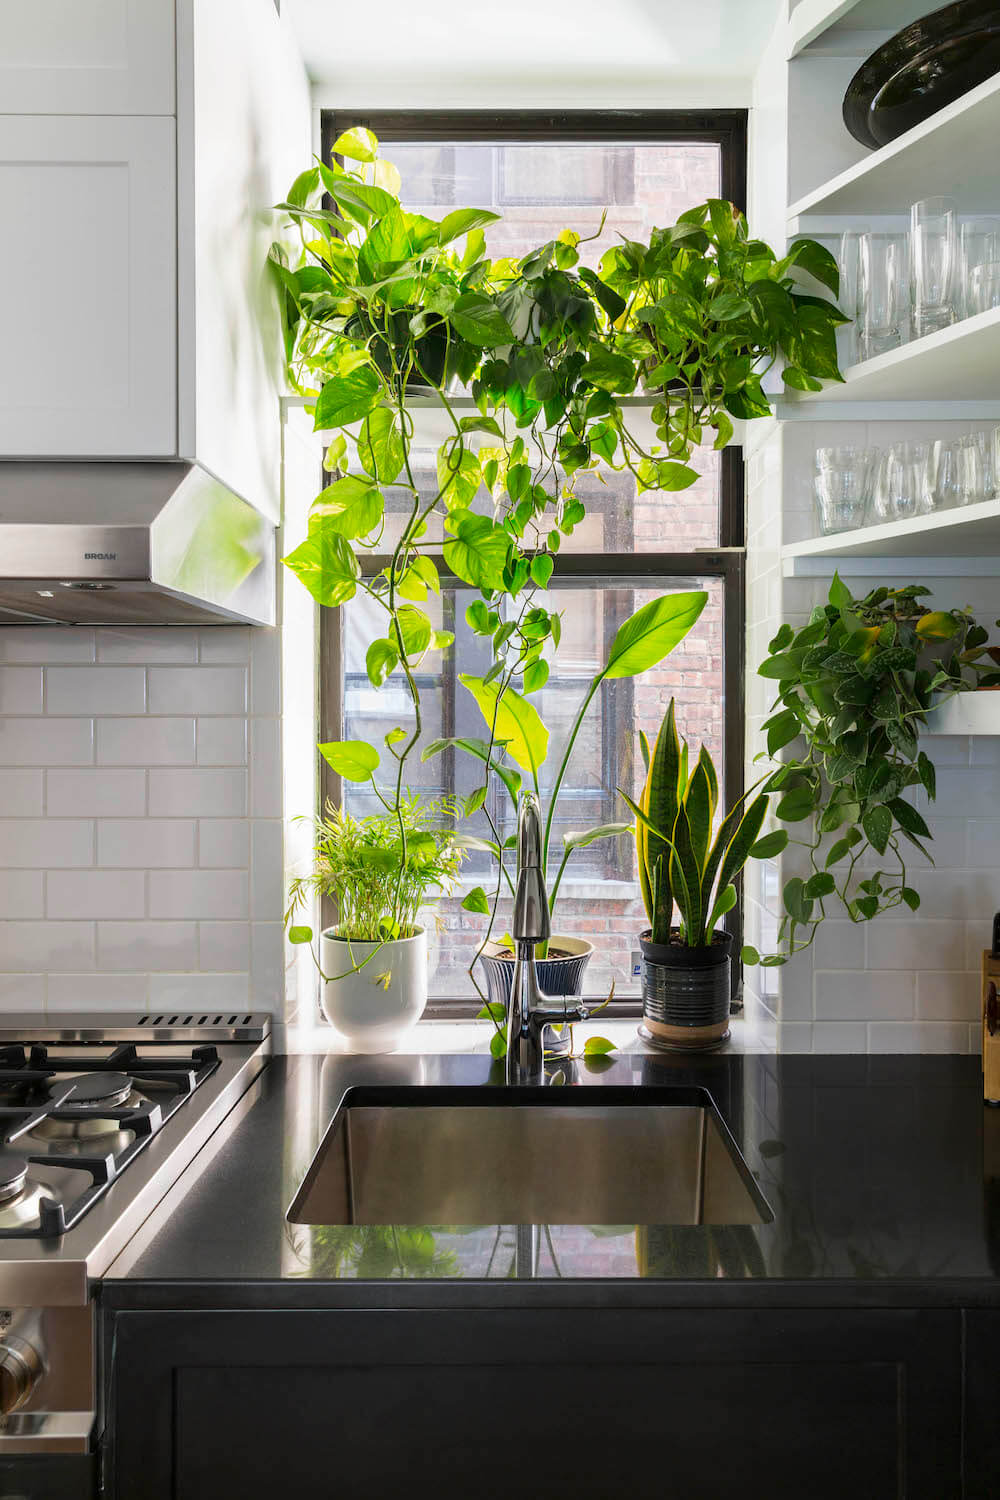 Plants hang over the kitchen sink